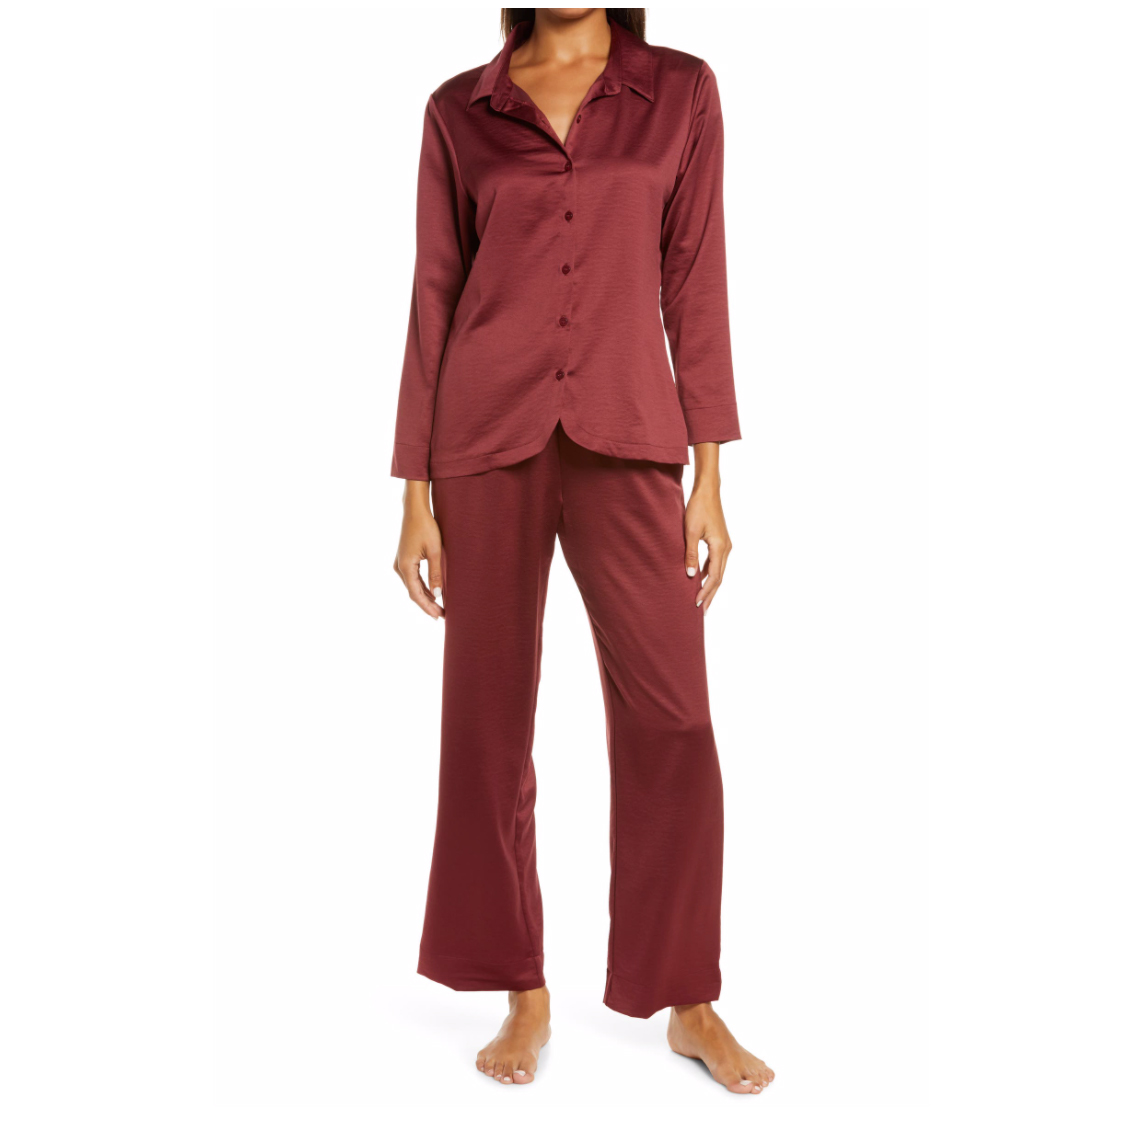 Nordstrom satin pajamas New Year's Eve outfit